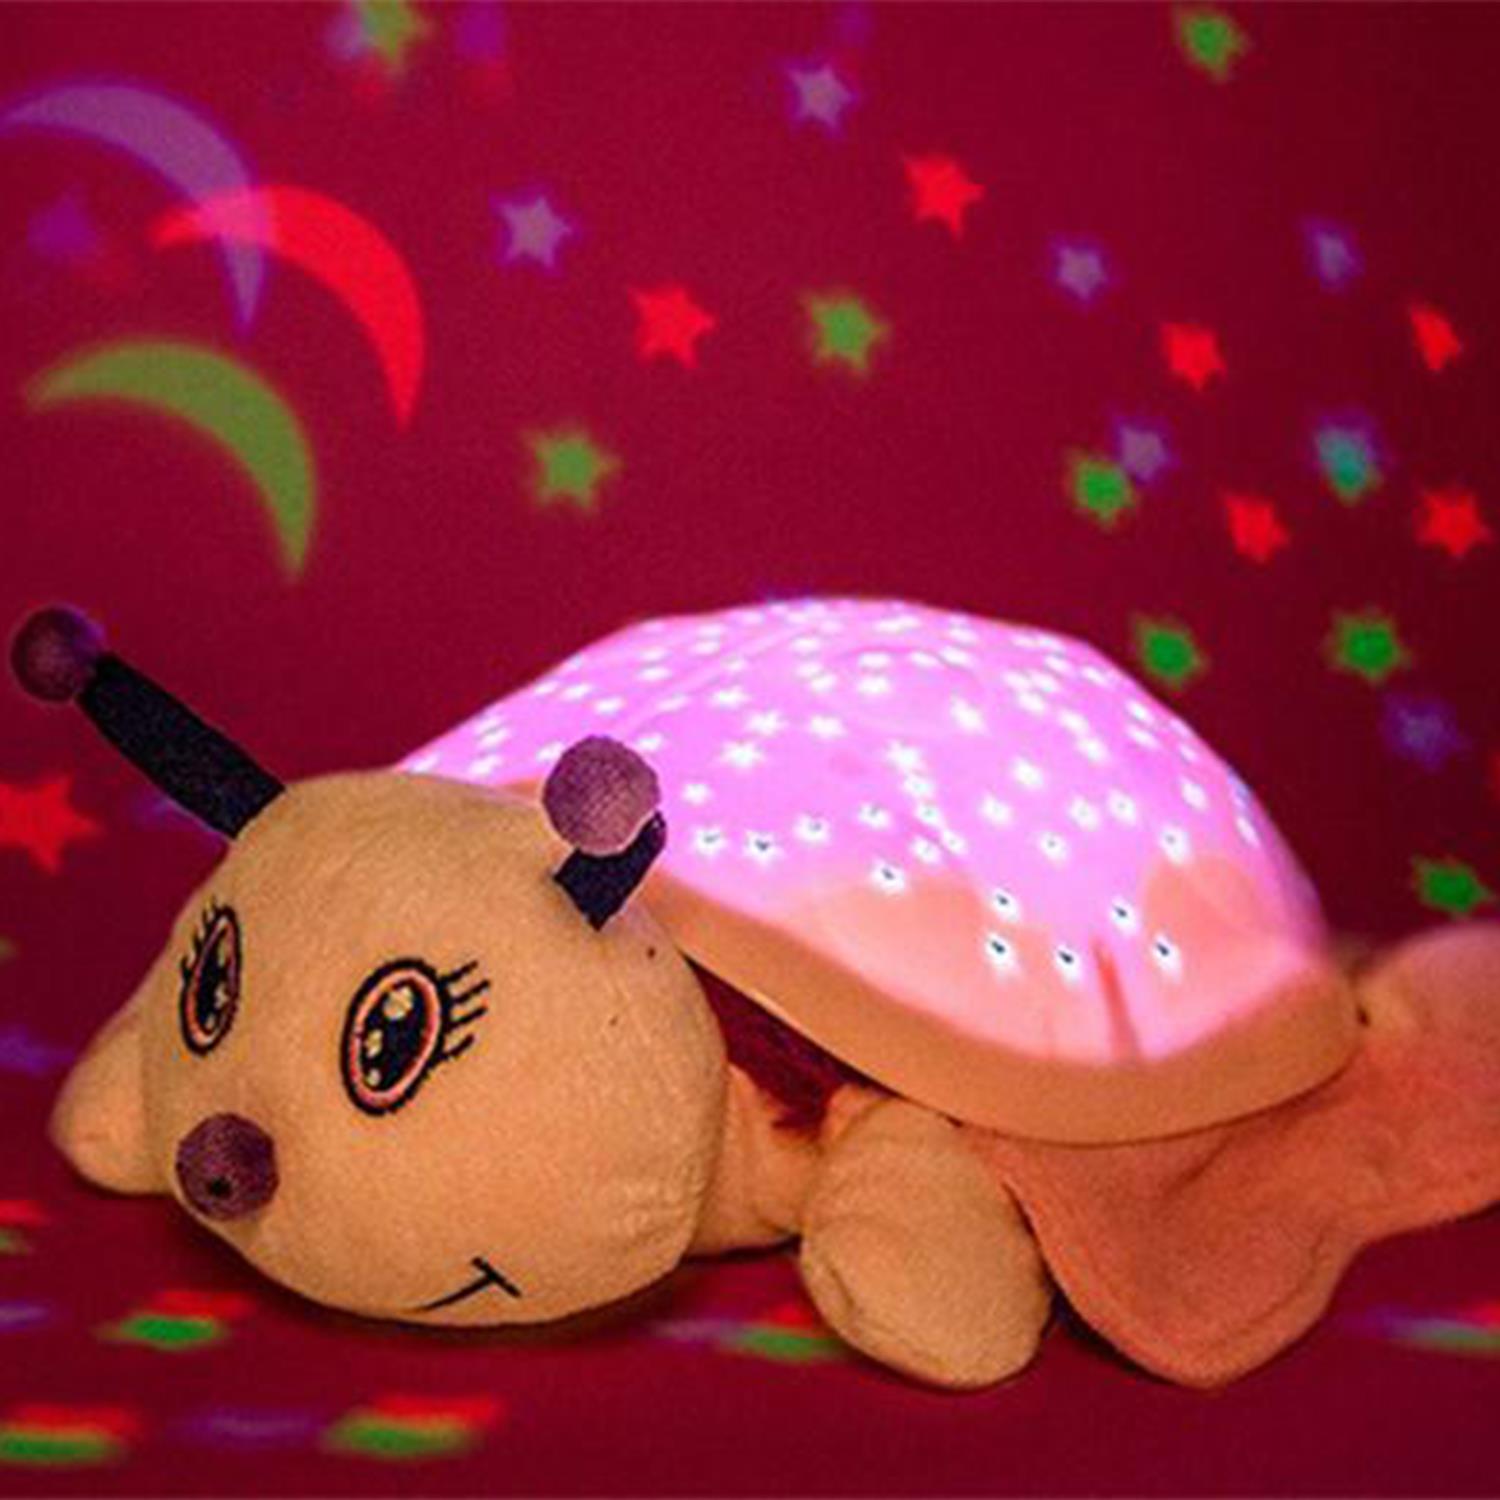 Light up Furry Friends without sound - Butterfly